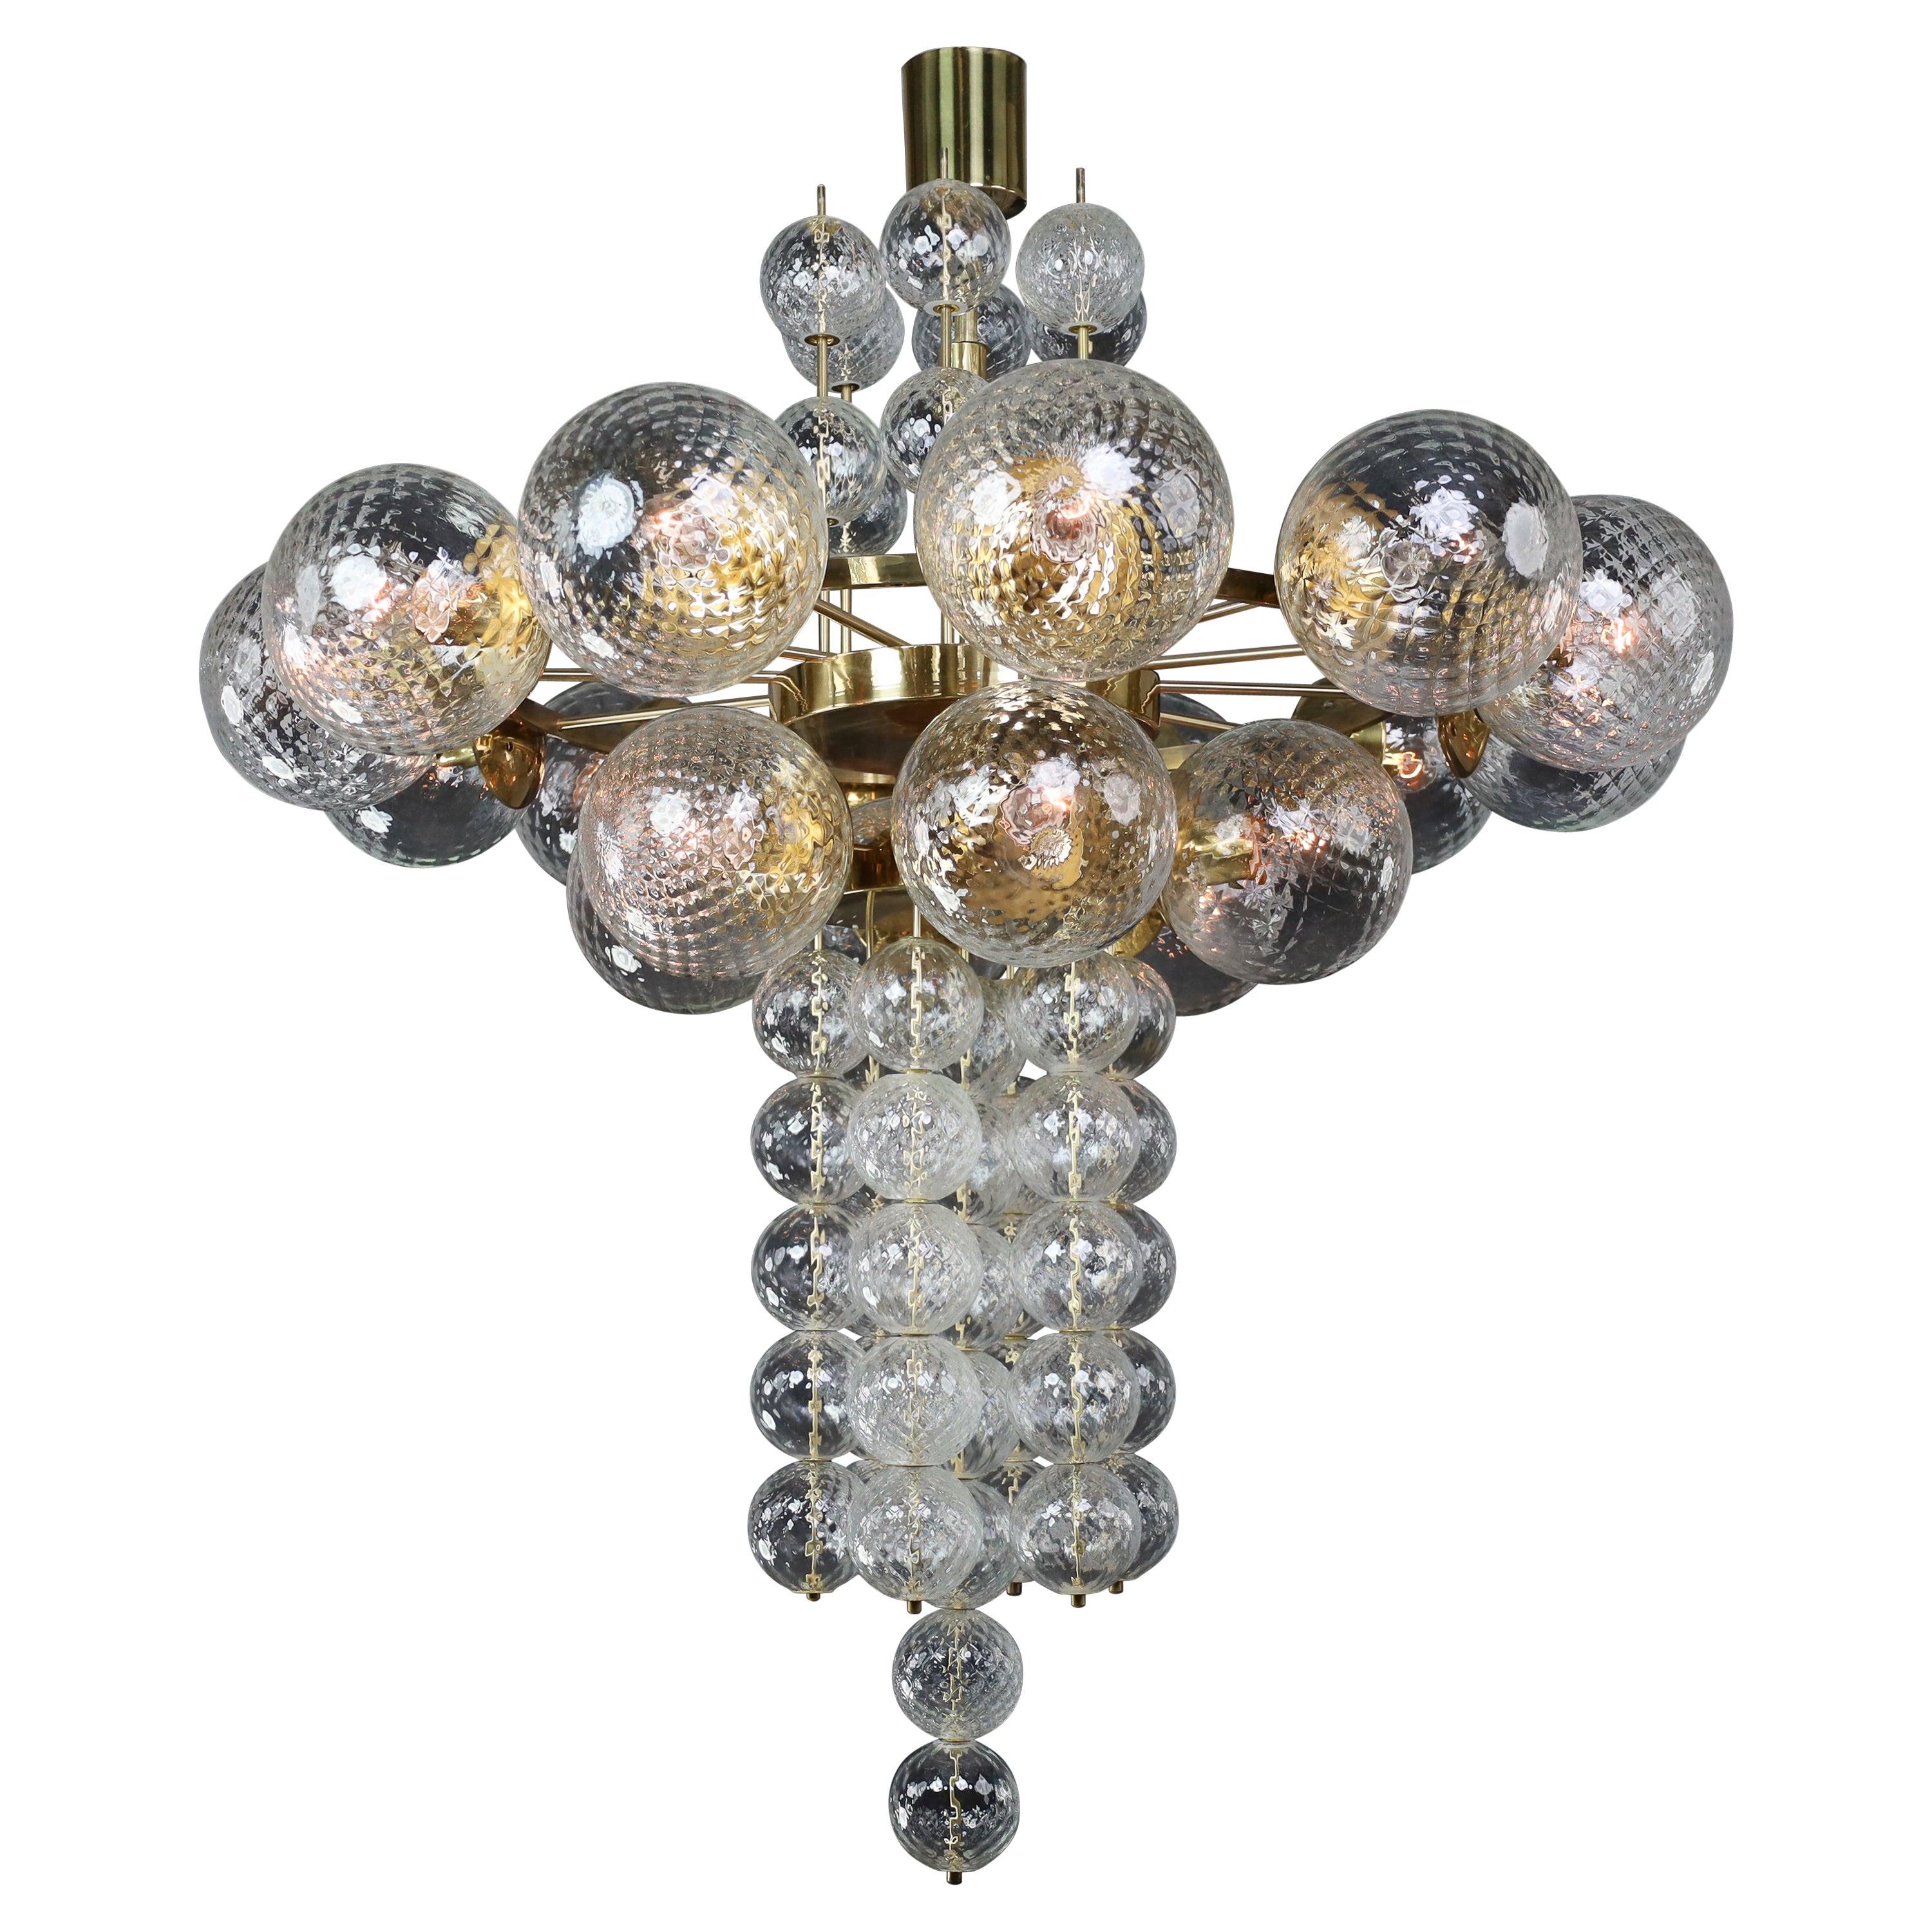 Large Chandelier with brass fixture and hand-blowed glass globes by Preciosa Cz. For Sale